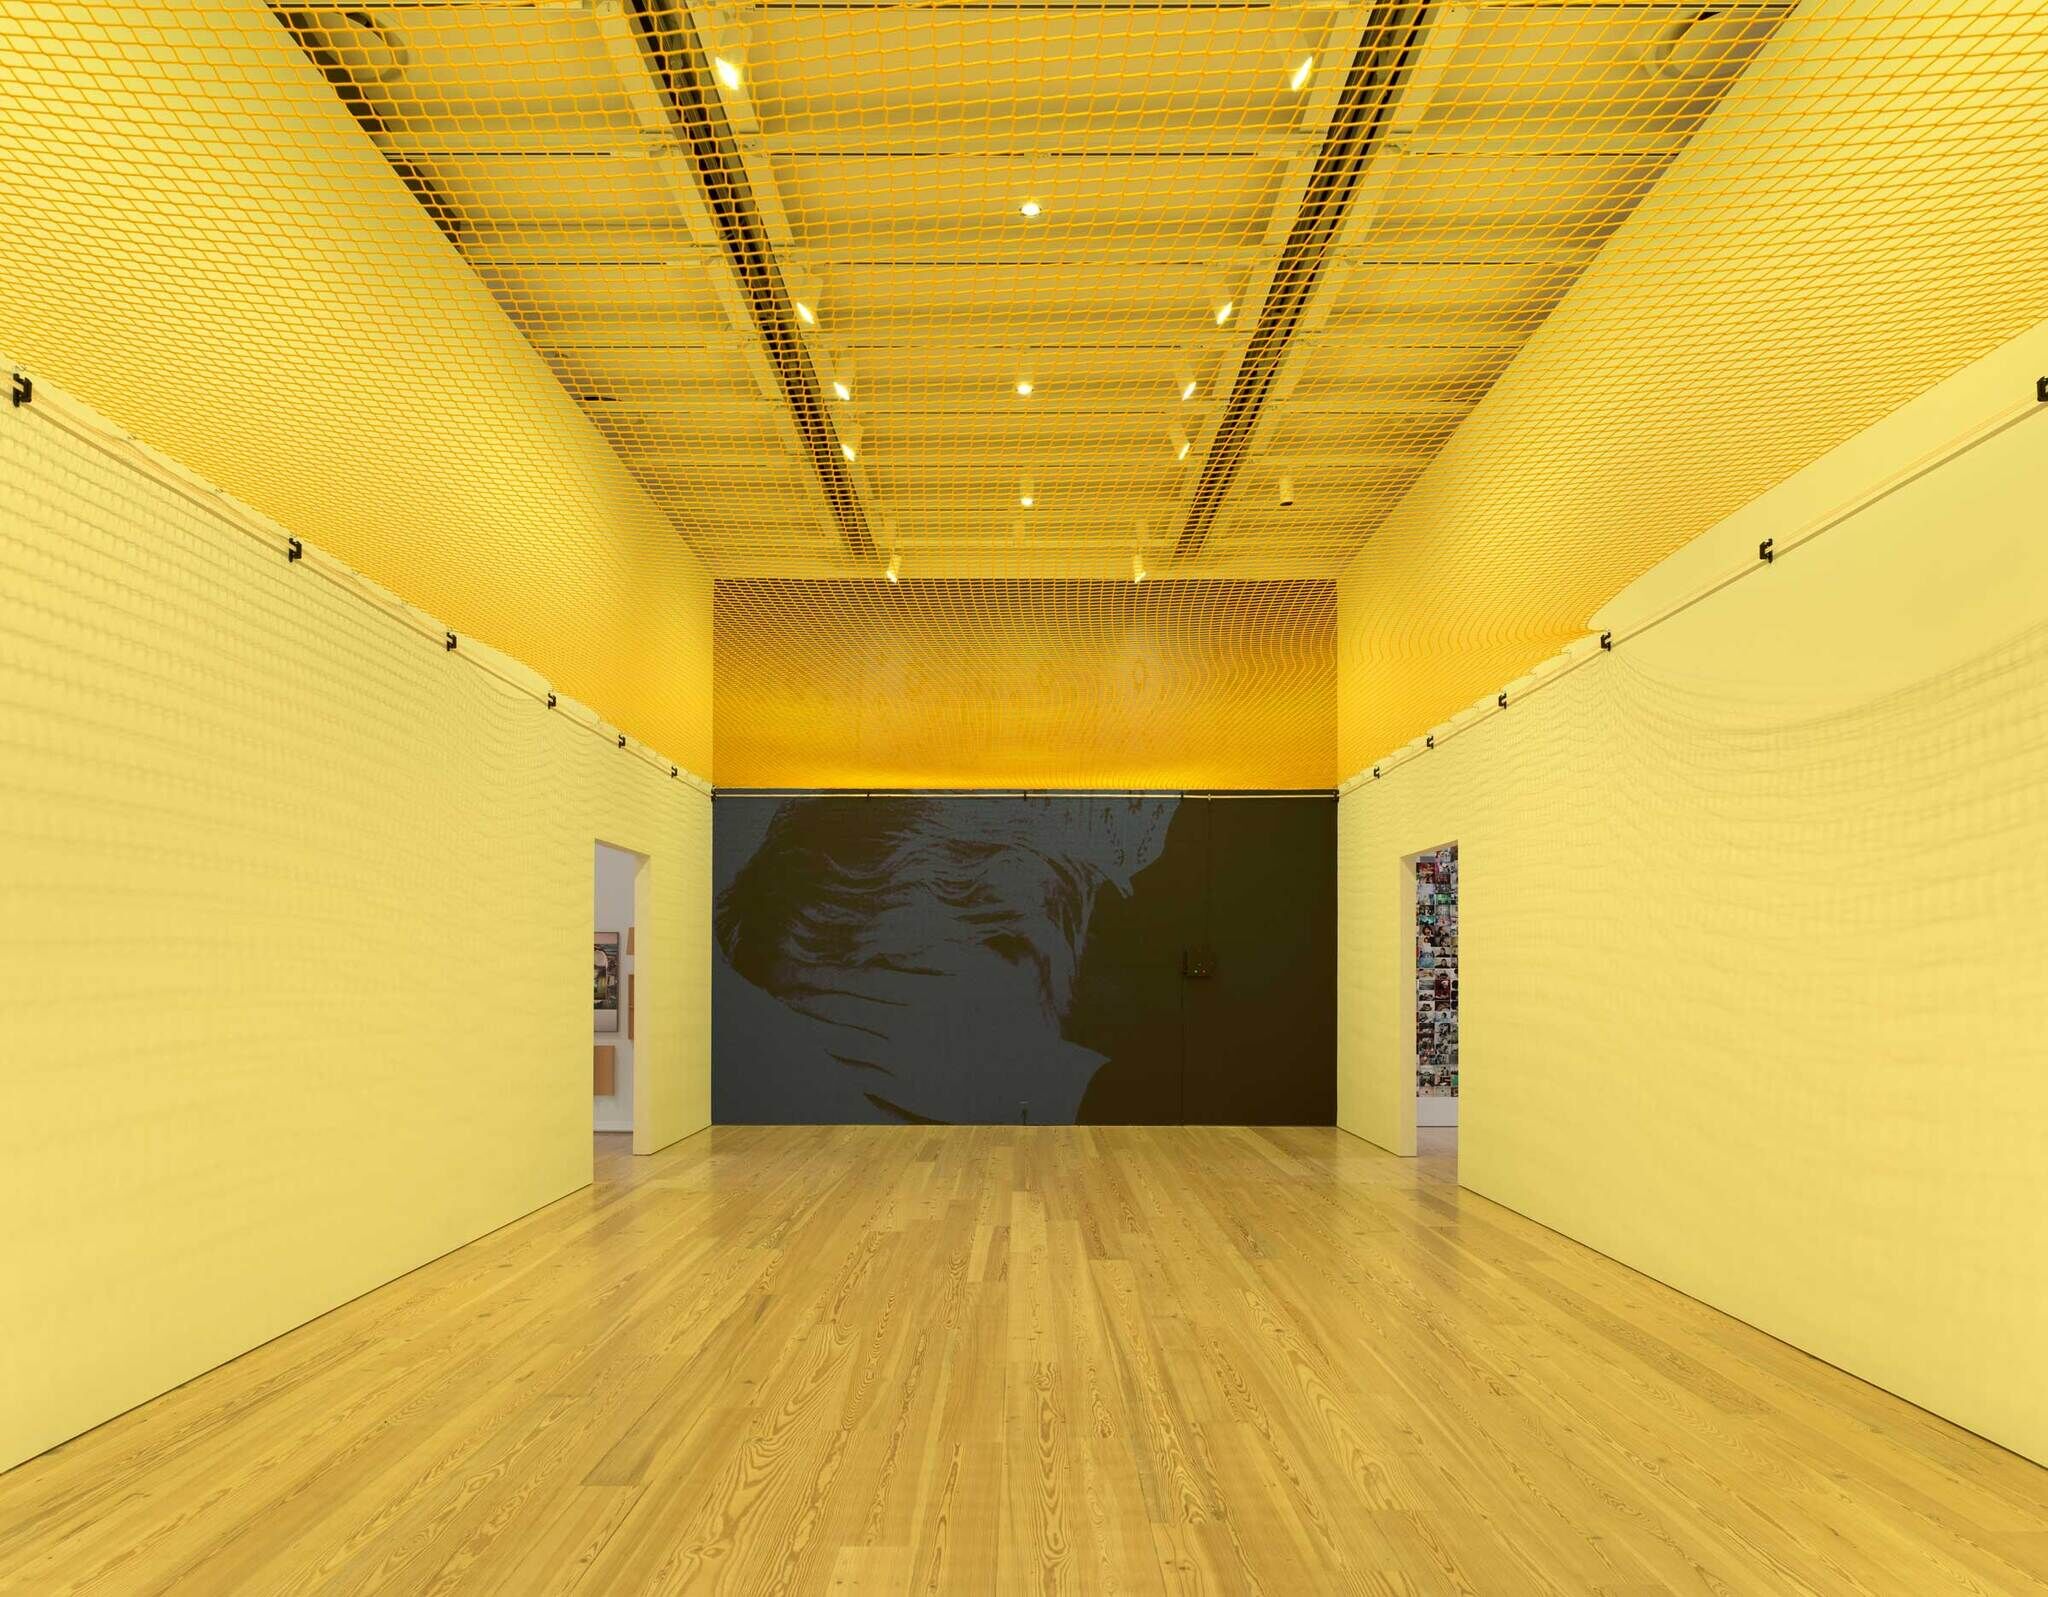 Empty gallery room awash with yellow walls, wooden floor, and a large abstract painting on the back wall.